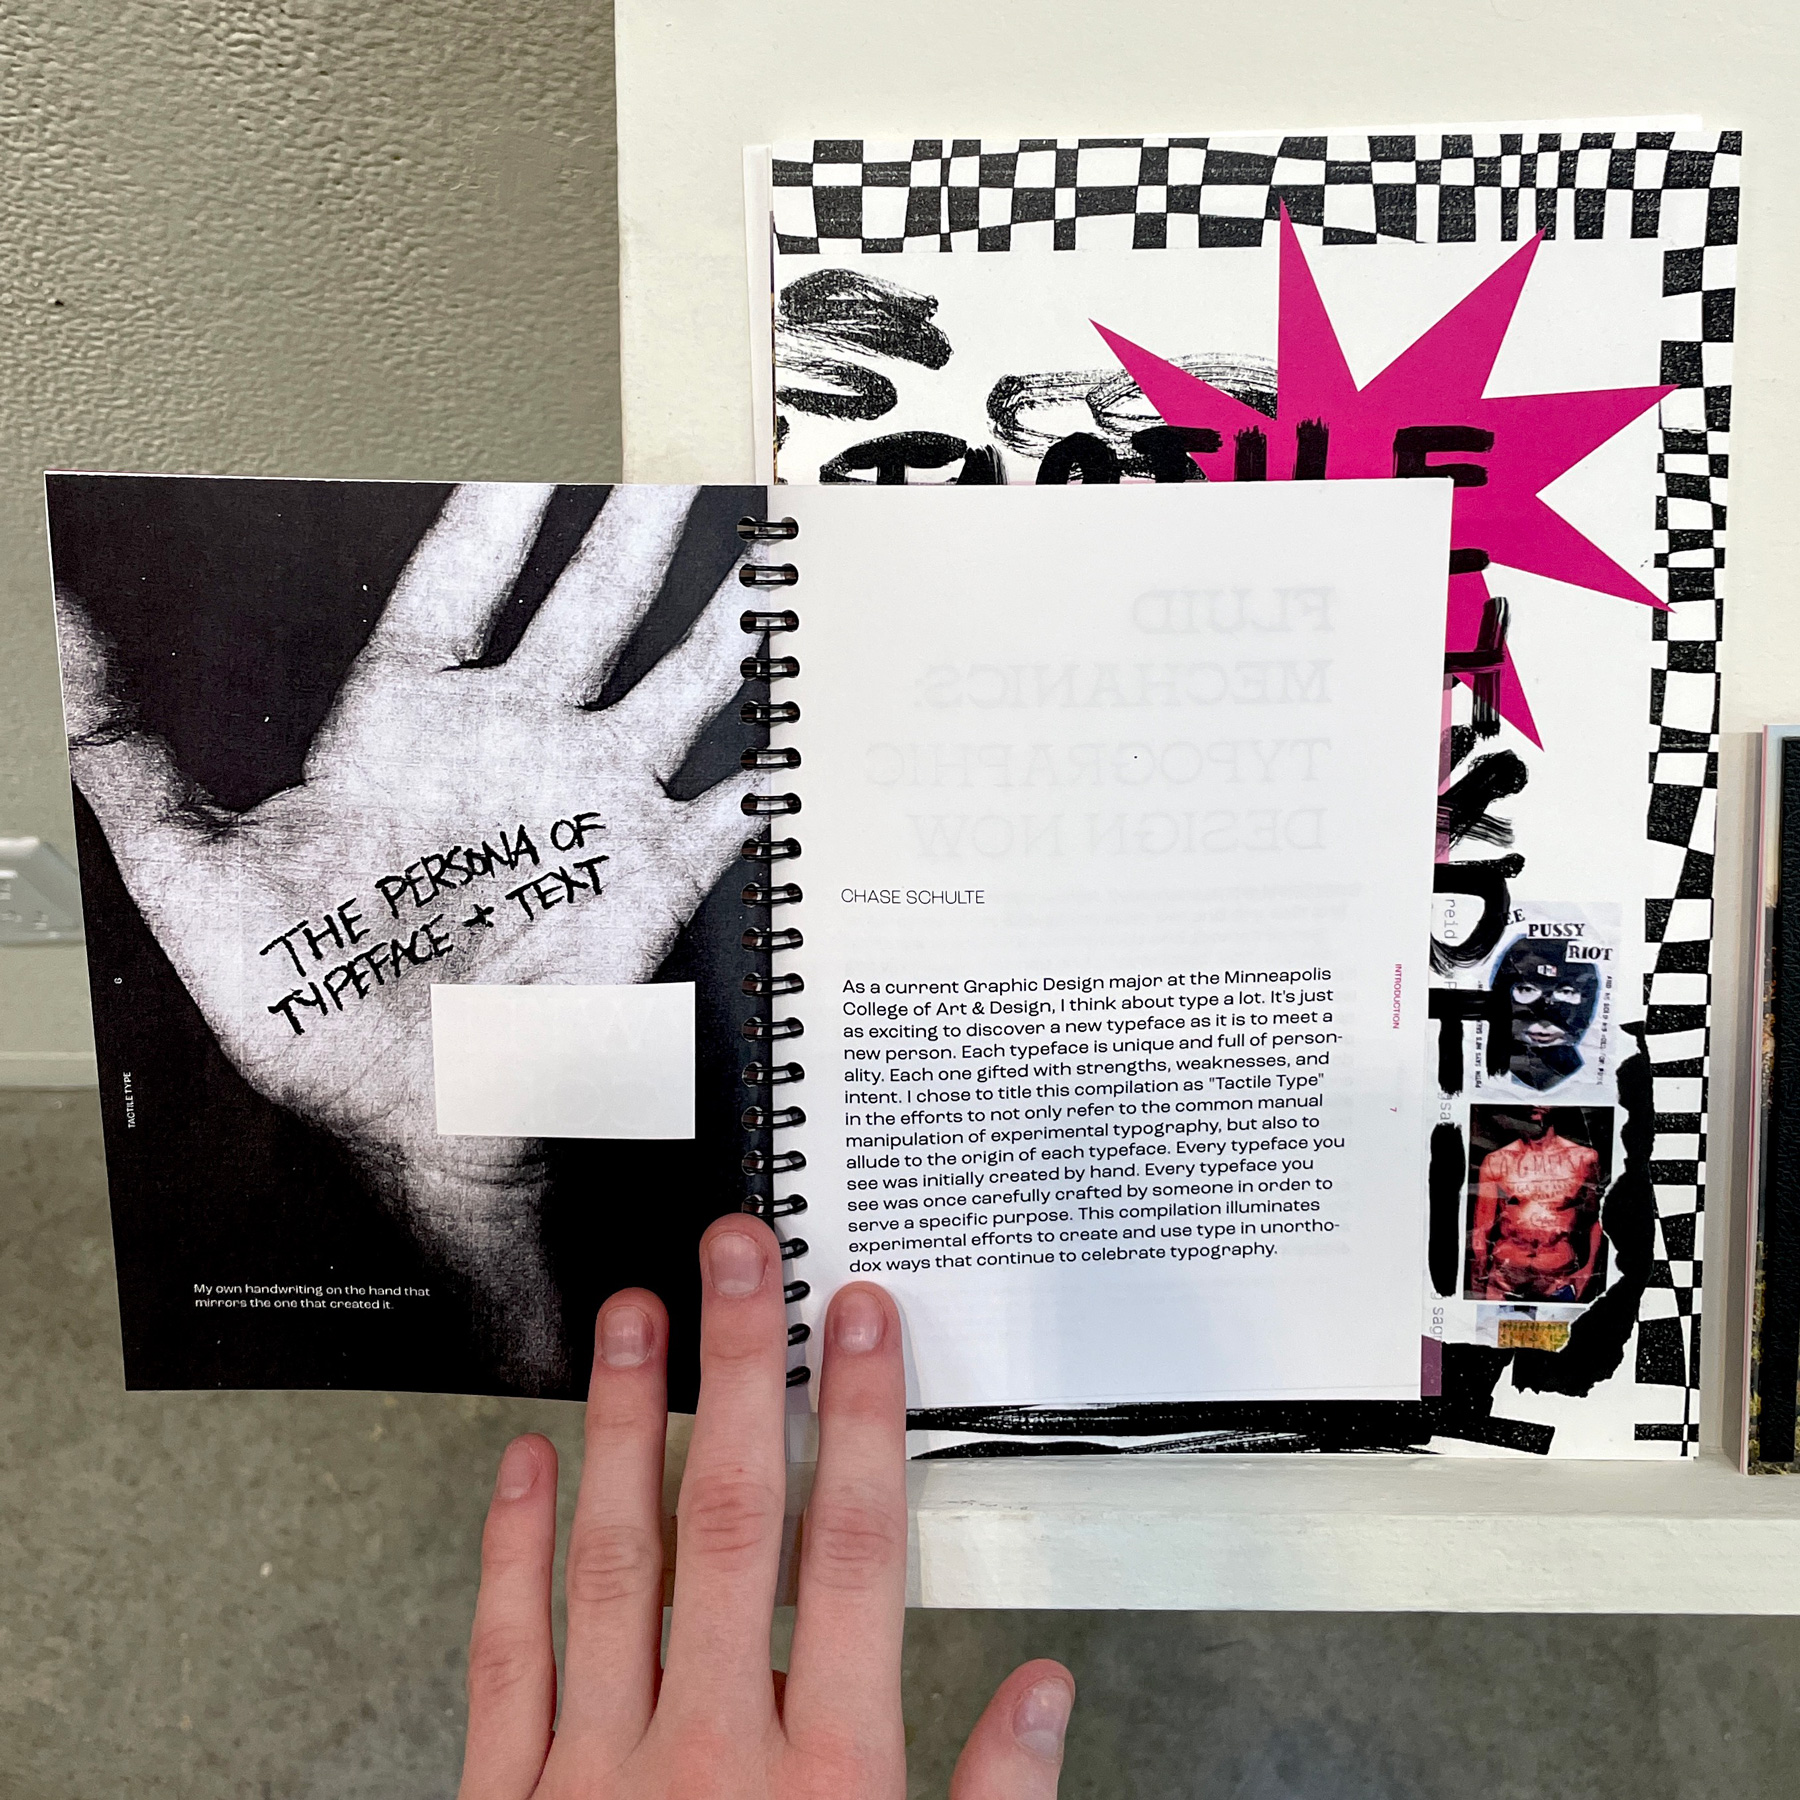 Type book by Chase Schulte